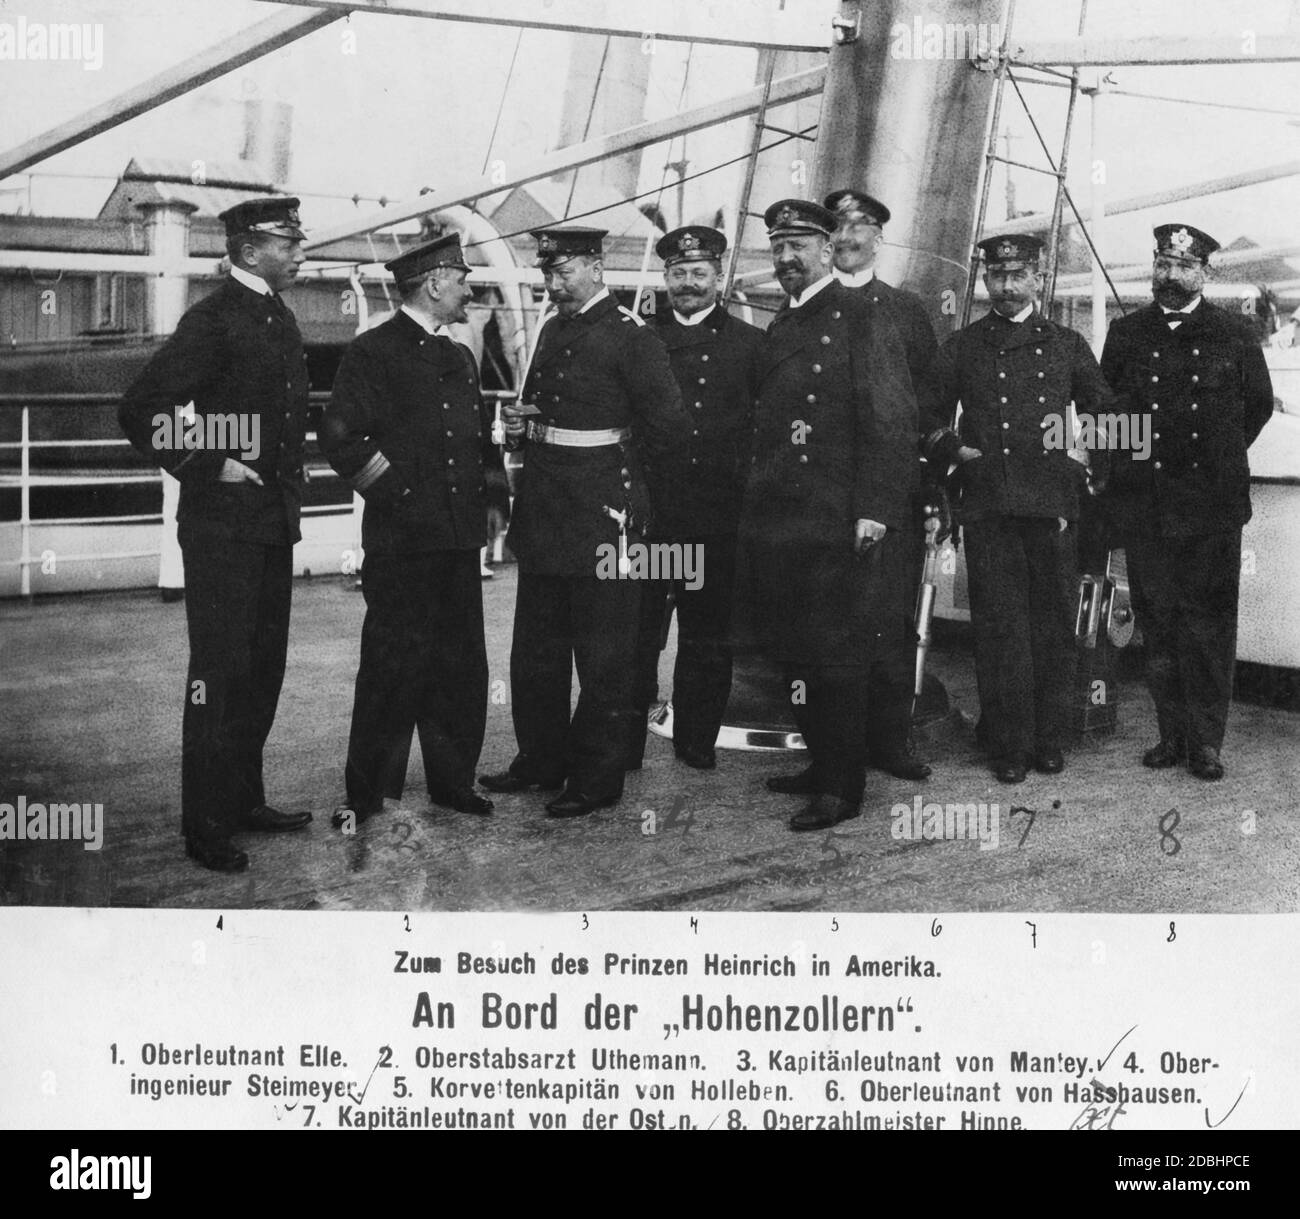 The picture shows part of the crew on board the yacht SMY Hohenzollern (from left to right): First Lieutenant Elle, Chief Medical Officer Walter Uthemann, Captain Eberhard von Mantey, Chief Engineer Steinmeyer, Corvette Captain von Holleben, First Lieutenant Wilhelm von Haxthausen, Captain von der Osten and Chief Paymaster Hippe. The Hohenzollern went to New York at the beginning of 1902, from where Prince Henry of Prussia undertook a tour of the USA. Stock Photo